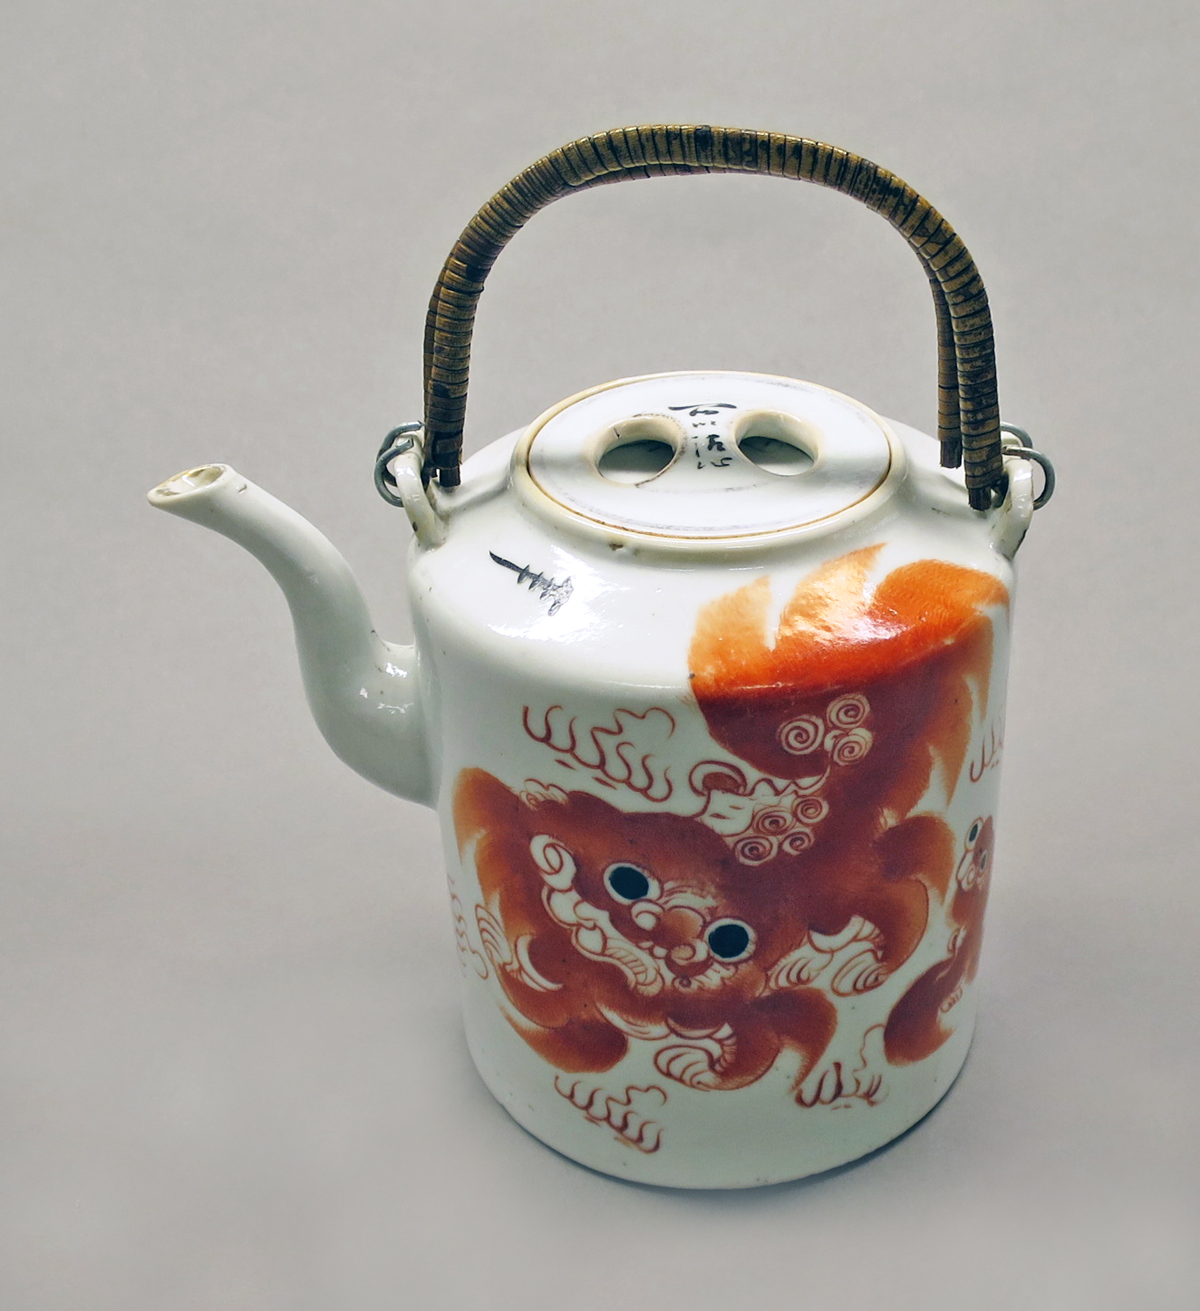 2014.0016.275 A, B Teapot and lid, overall